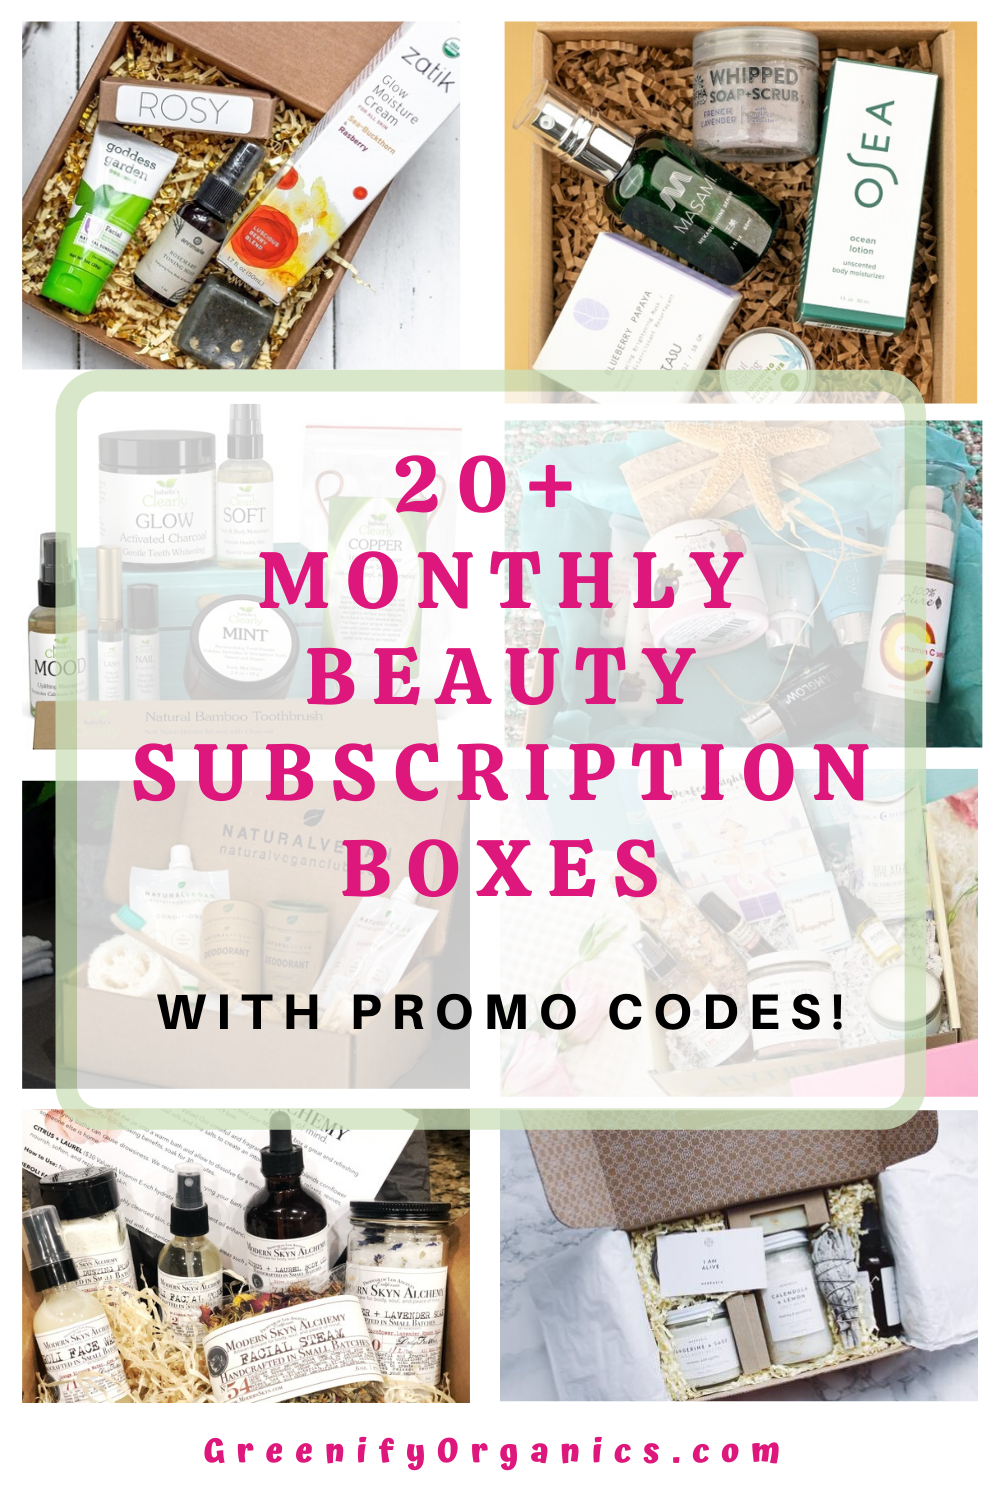 Best Monthly Subscription Boxes With Promo Codes! -   19 organic beauty Box ideas